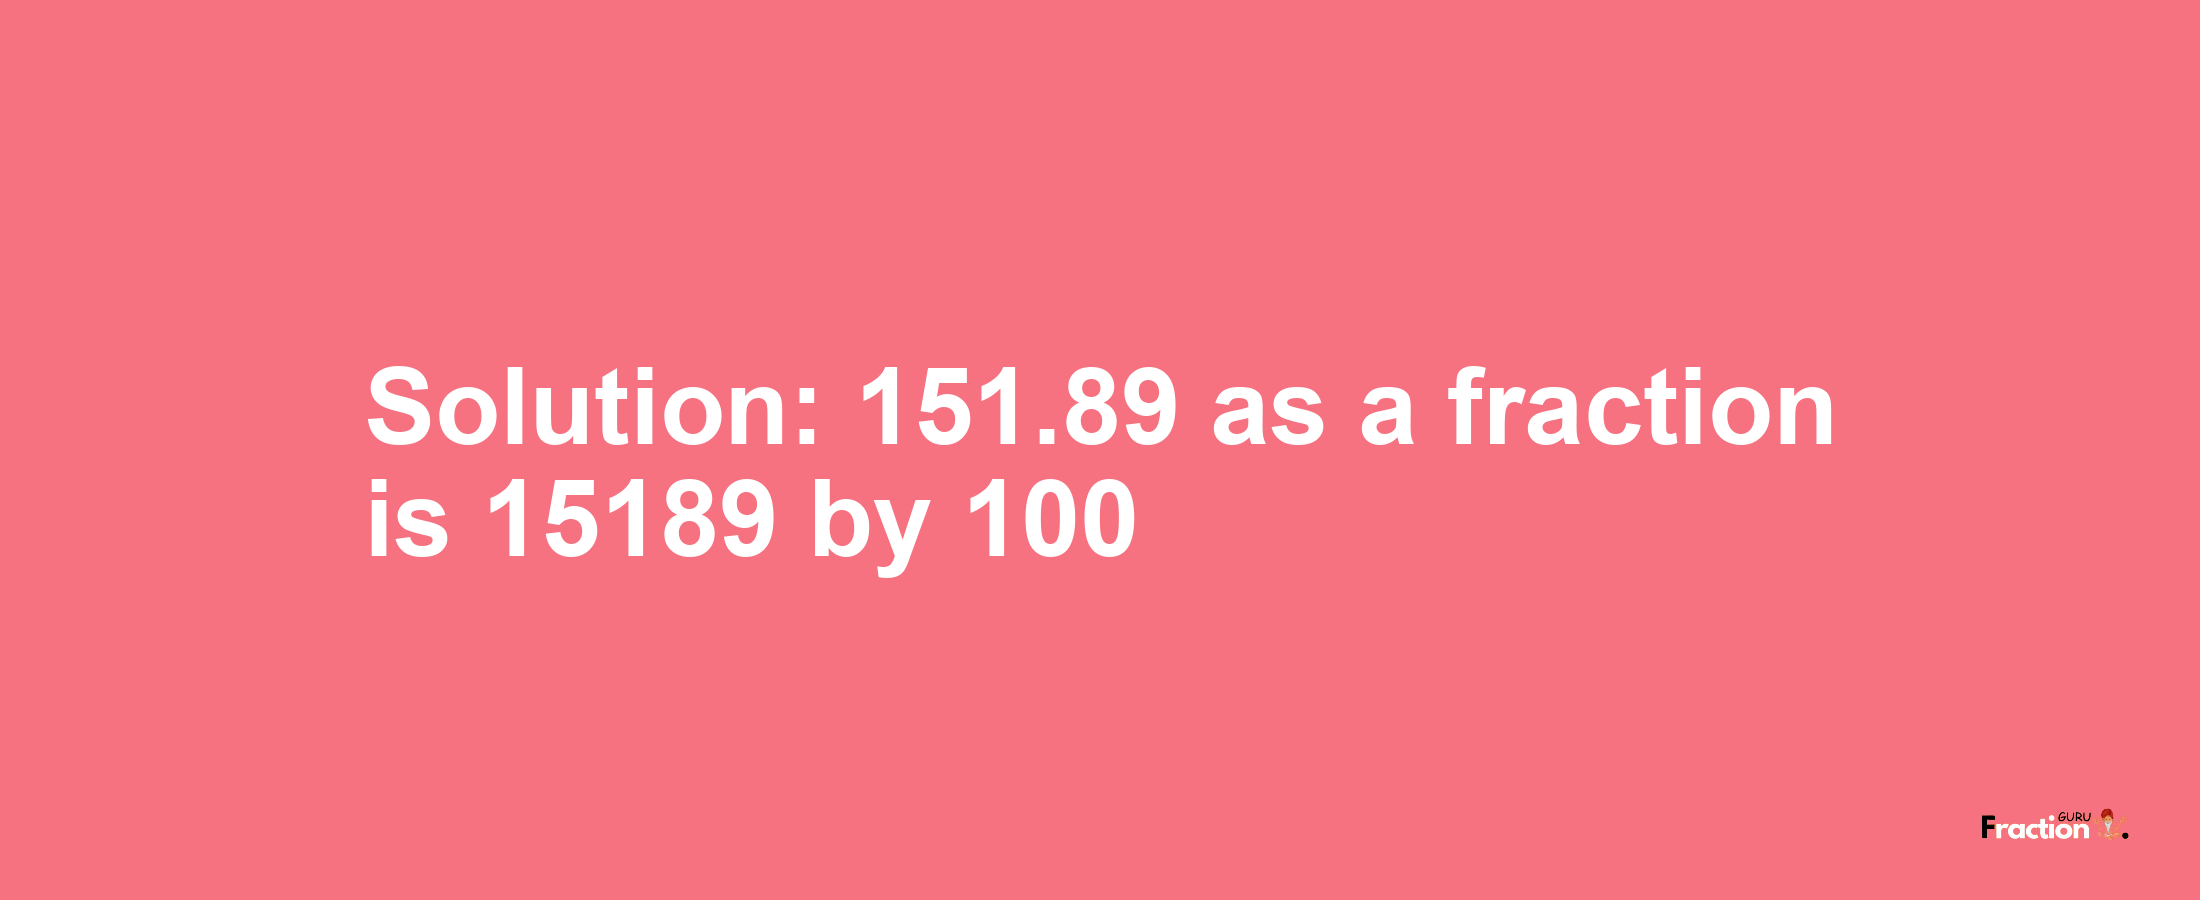 Solution:151.89 as a fraction is 15189/100